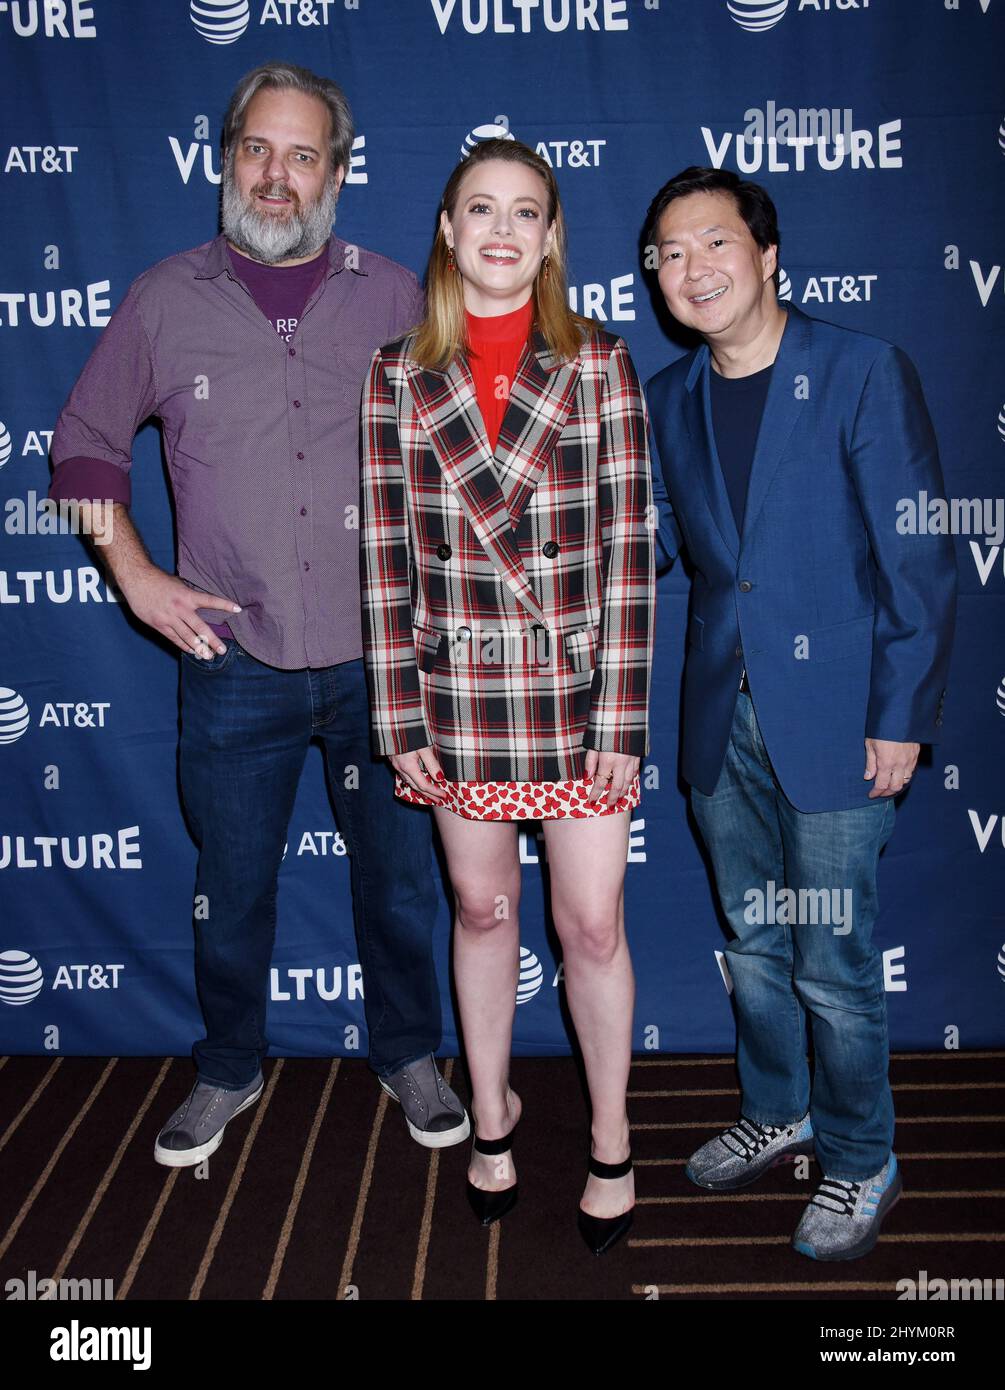 Dan Harmon, Gillian Jacobs and Ken Jeong at Vulture Festival Los Angeles 2019 held at the Hollywood Roosevelt Hotel on November 10, 2019 in Hollywood, CA. Stock Photo